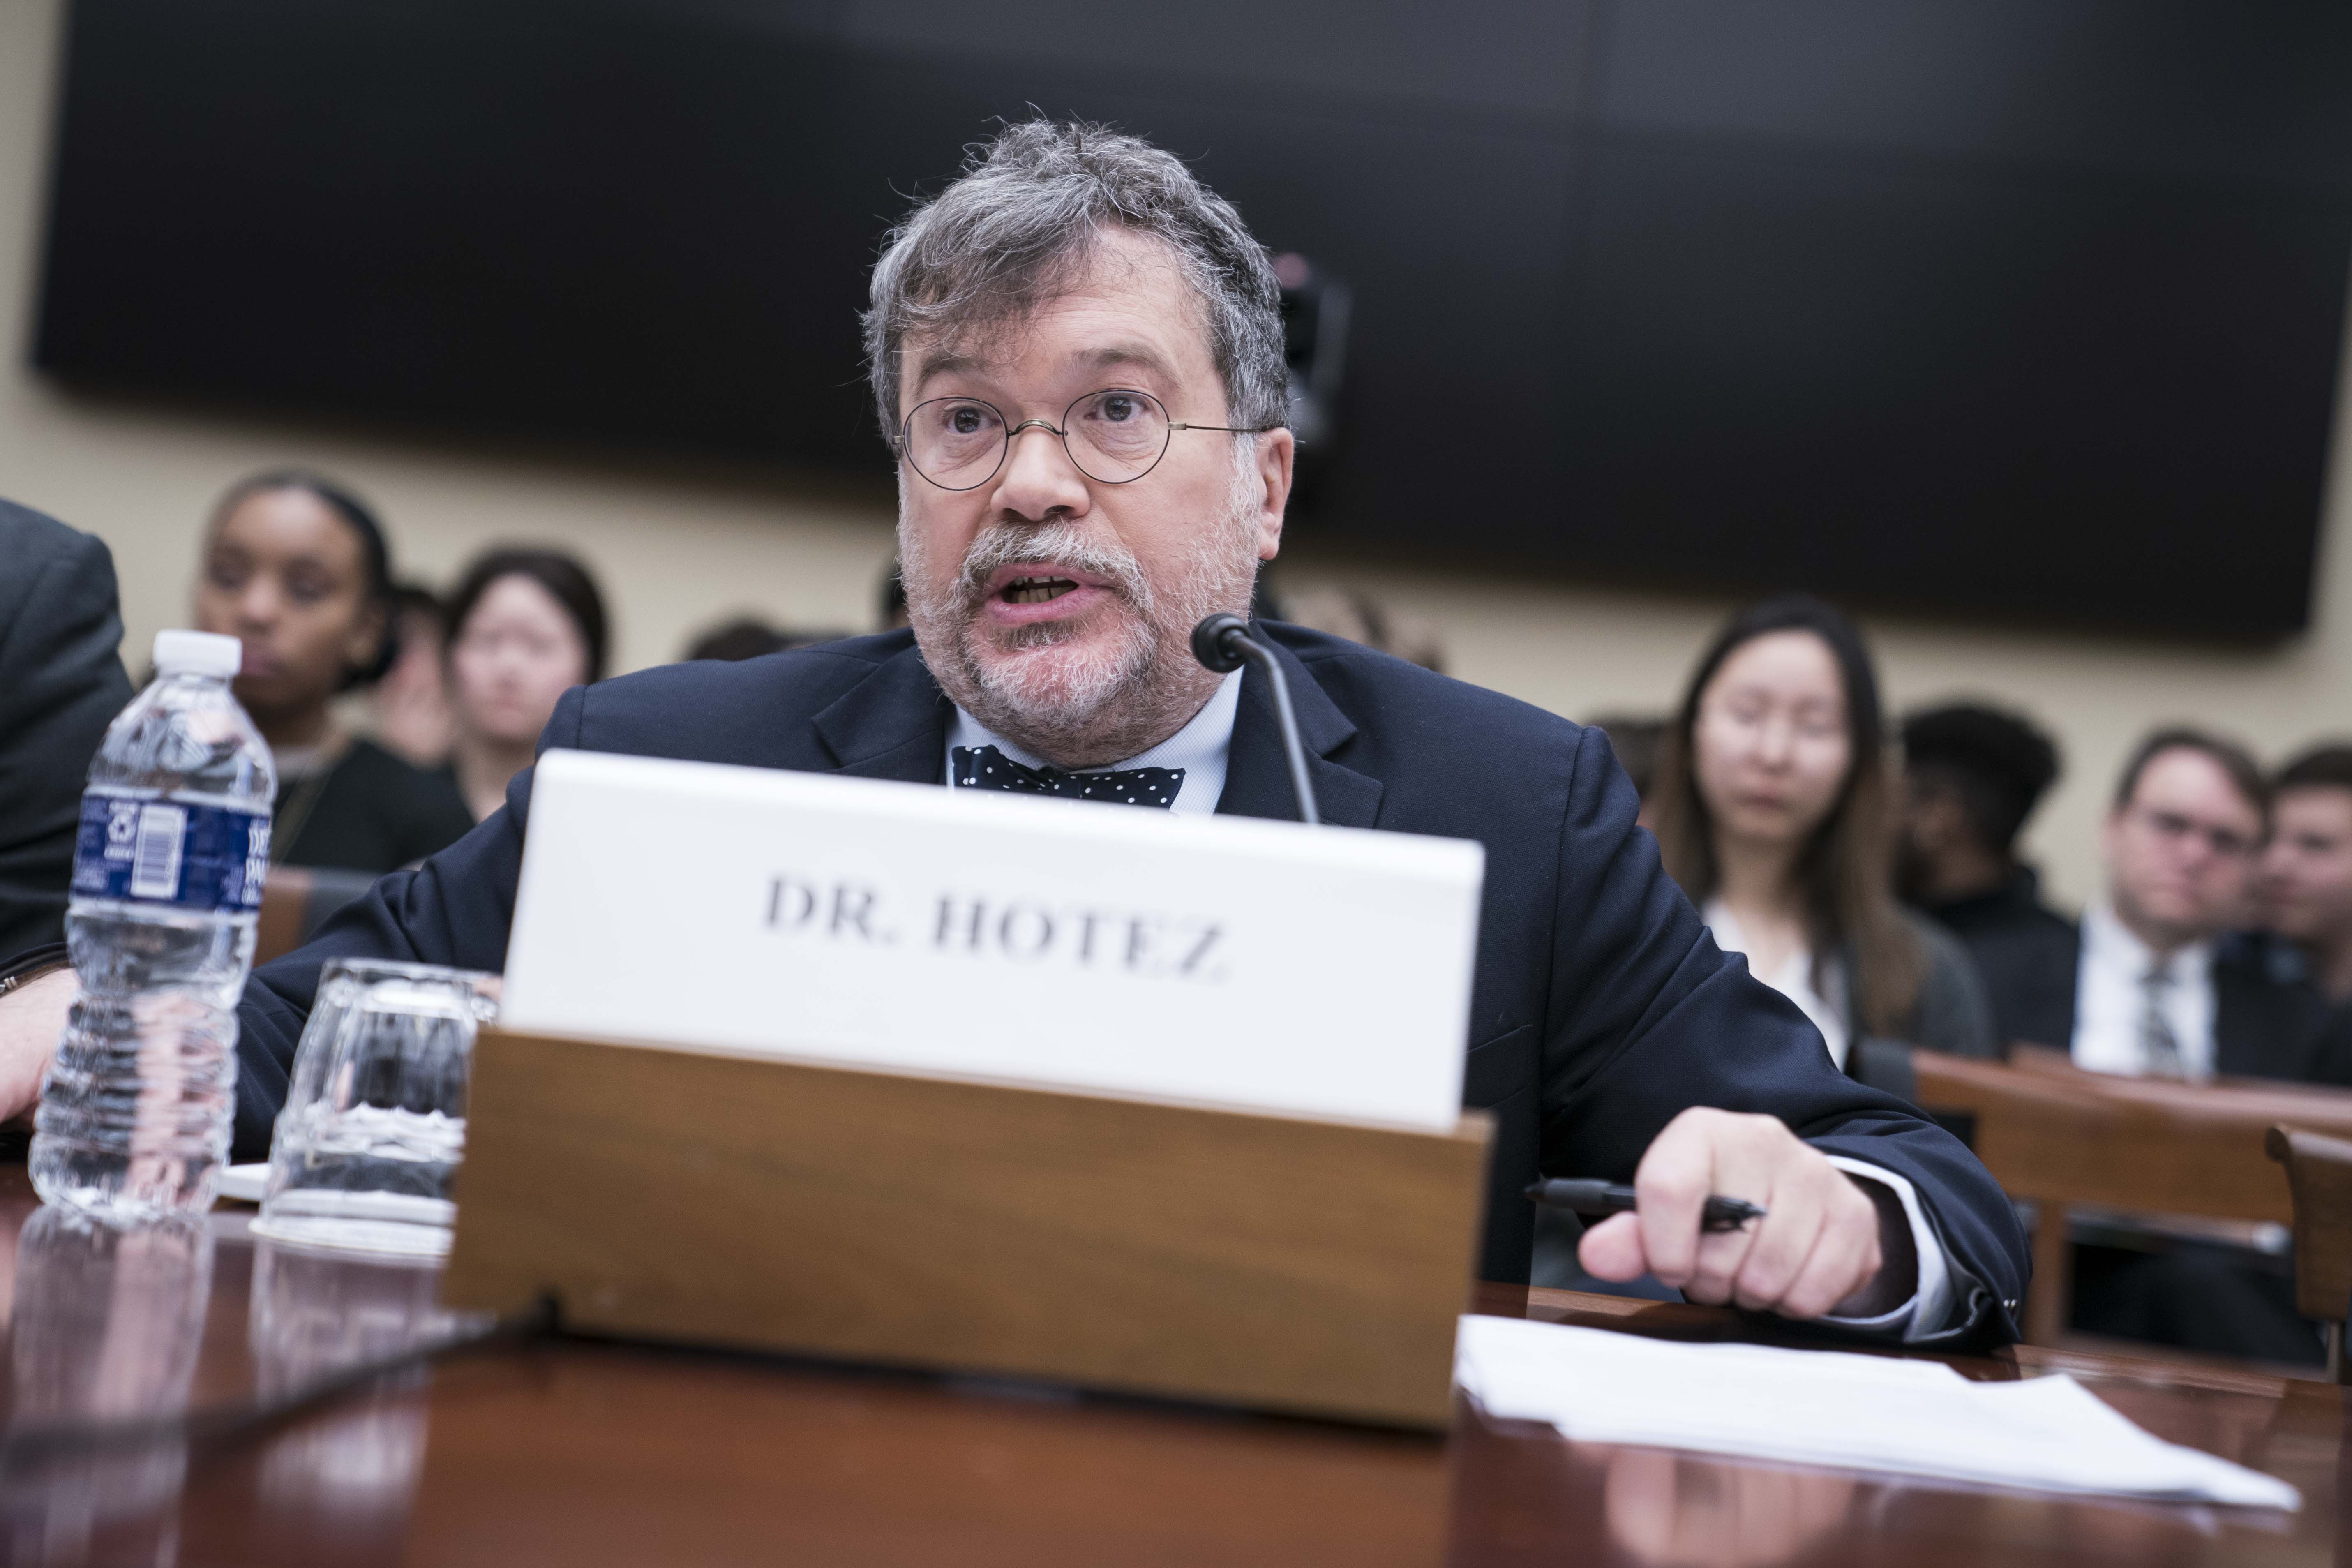 Dr. Peter Hotez sits behind a name placard at a Congressional hearing in 2020.